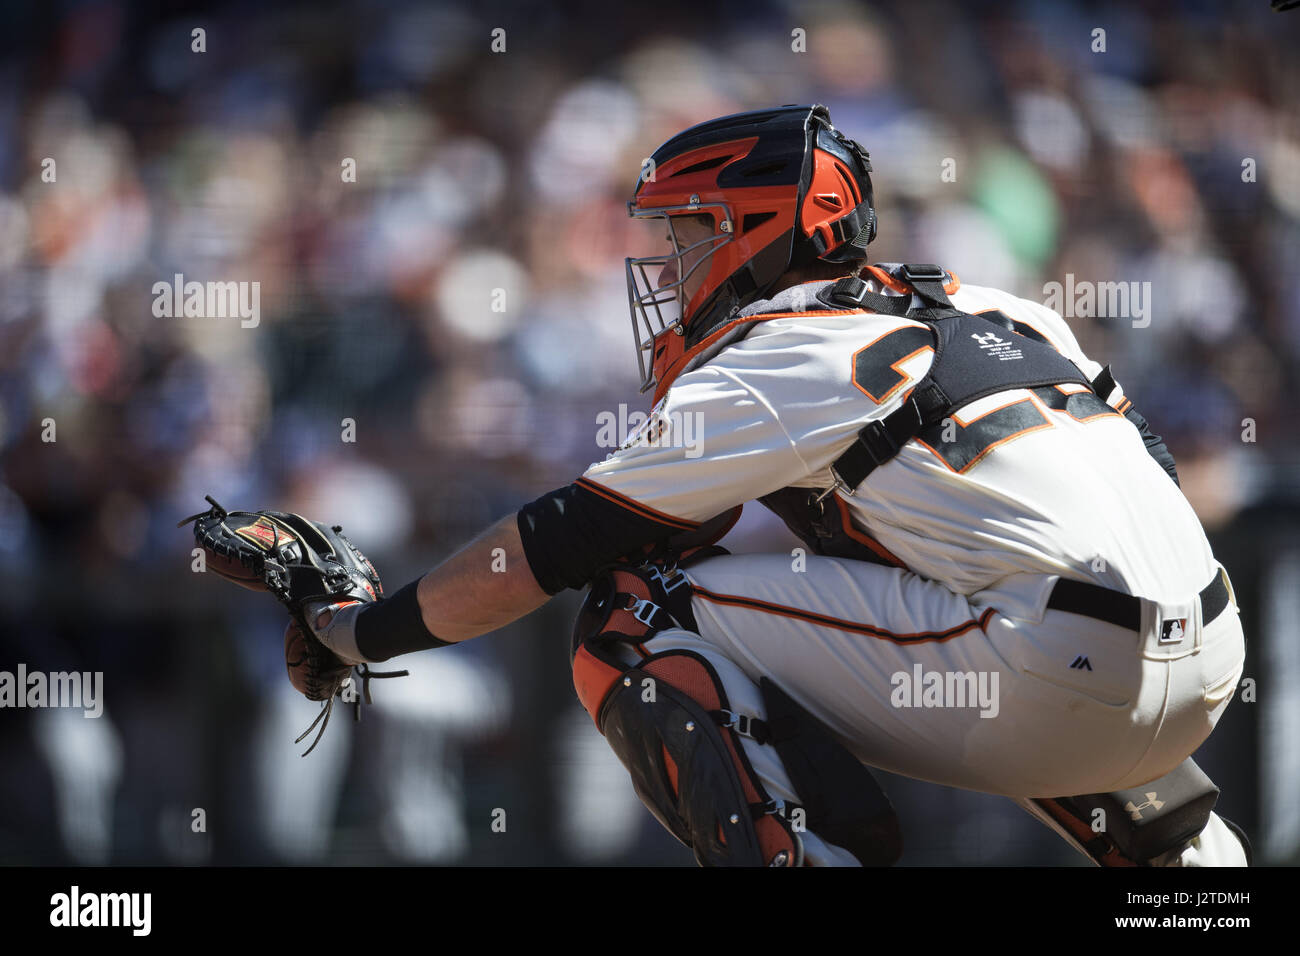 San Francisco, California, USA. 30th Apr, 2017. San Francisco Giants catcher Buster Posey (28) during a MLB game between the San Diego Padres and the San Francisco Giants at AT&T Park in San Francisco, California. Valerie Shoaps/CSM/Alamy Live News Stock Photo